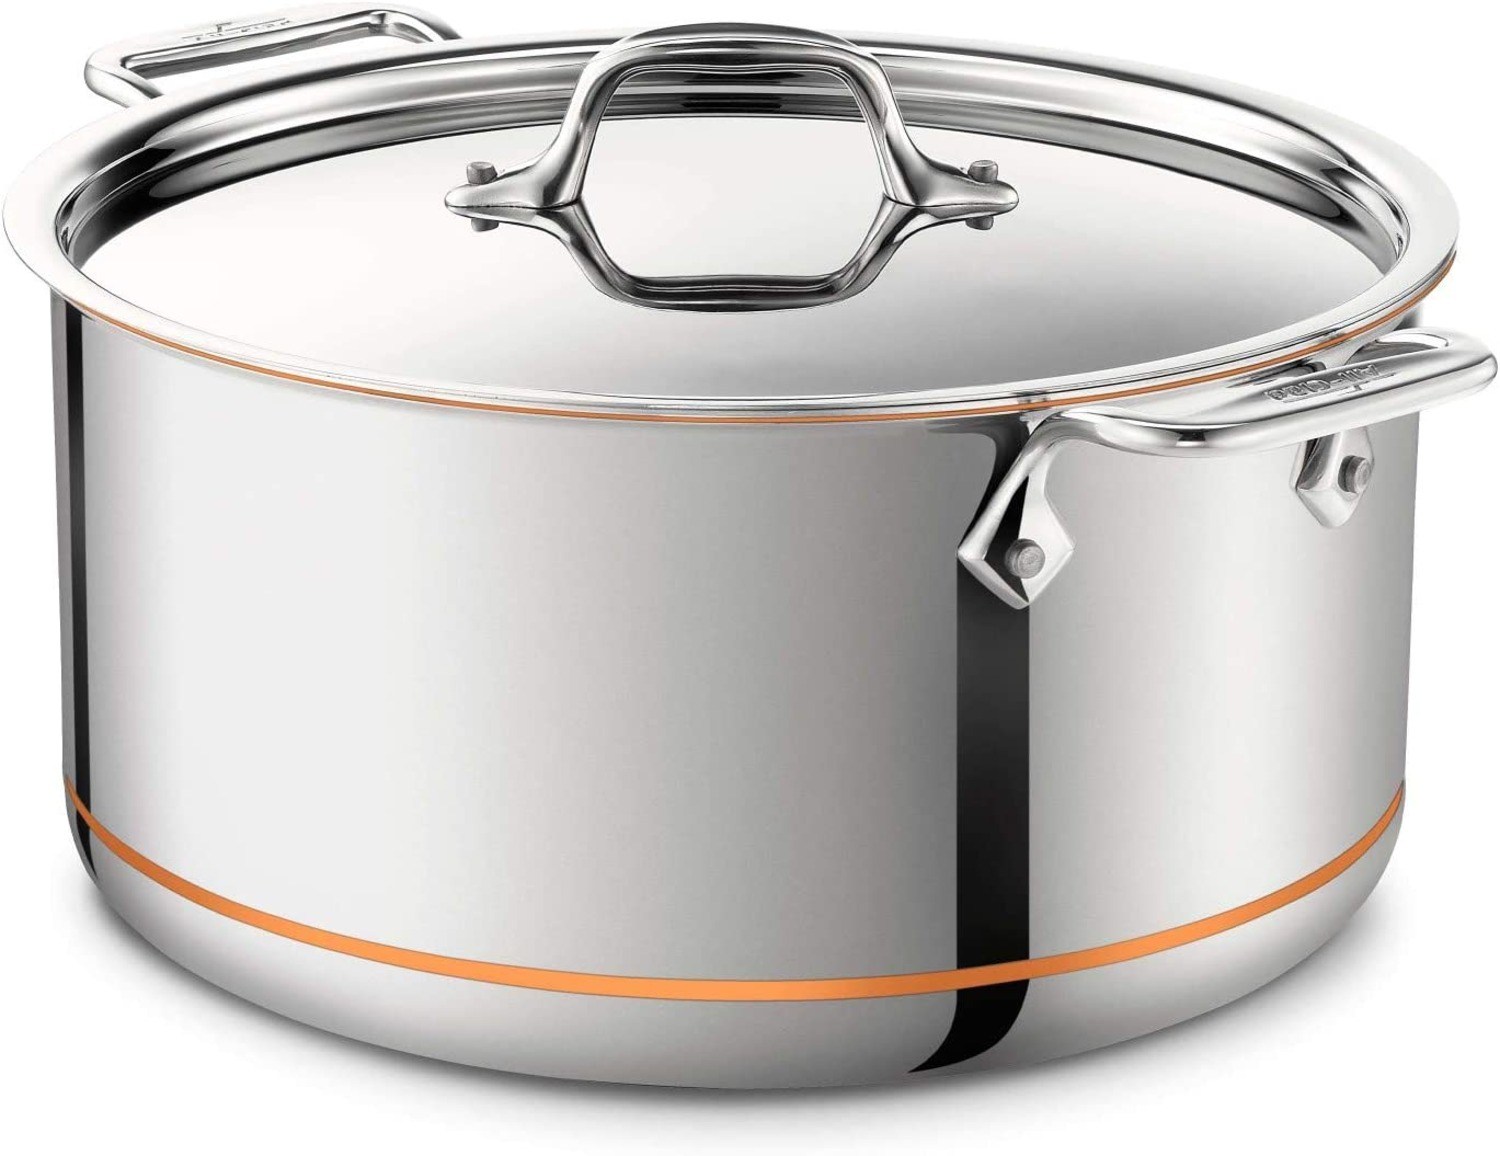 4-quart Stock Pot with Lid in 5-ply Stainless Steel » NUCU